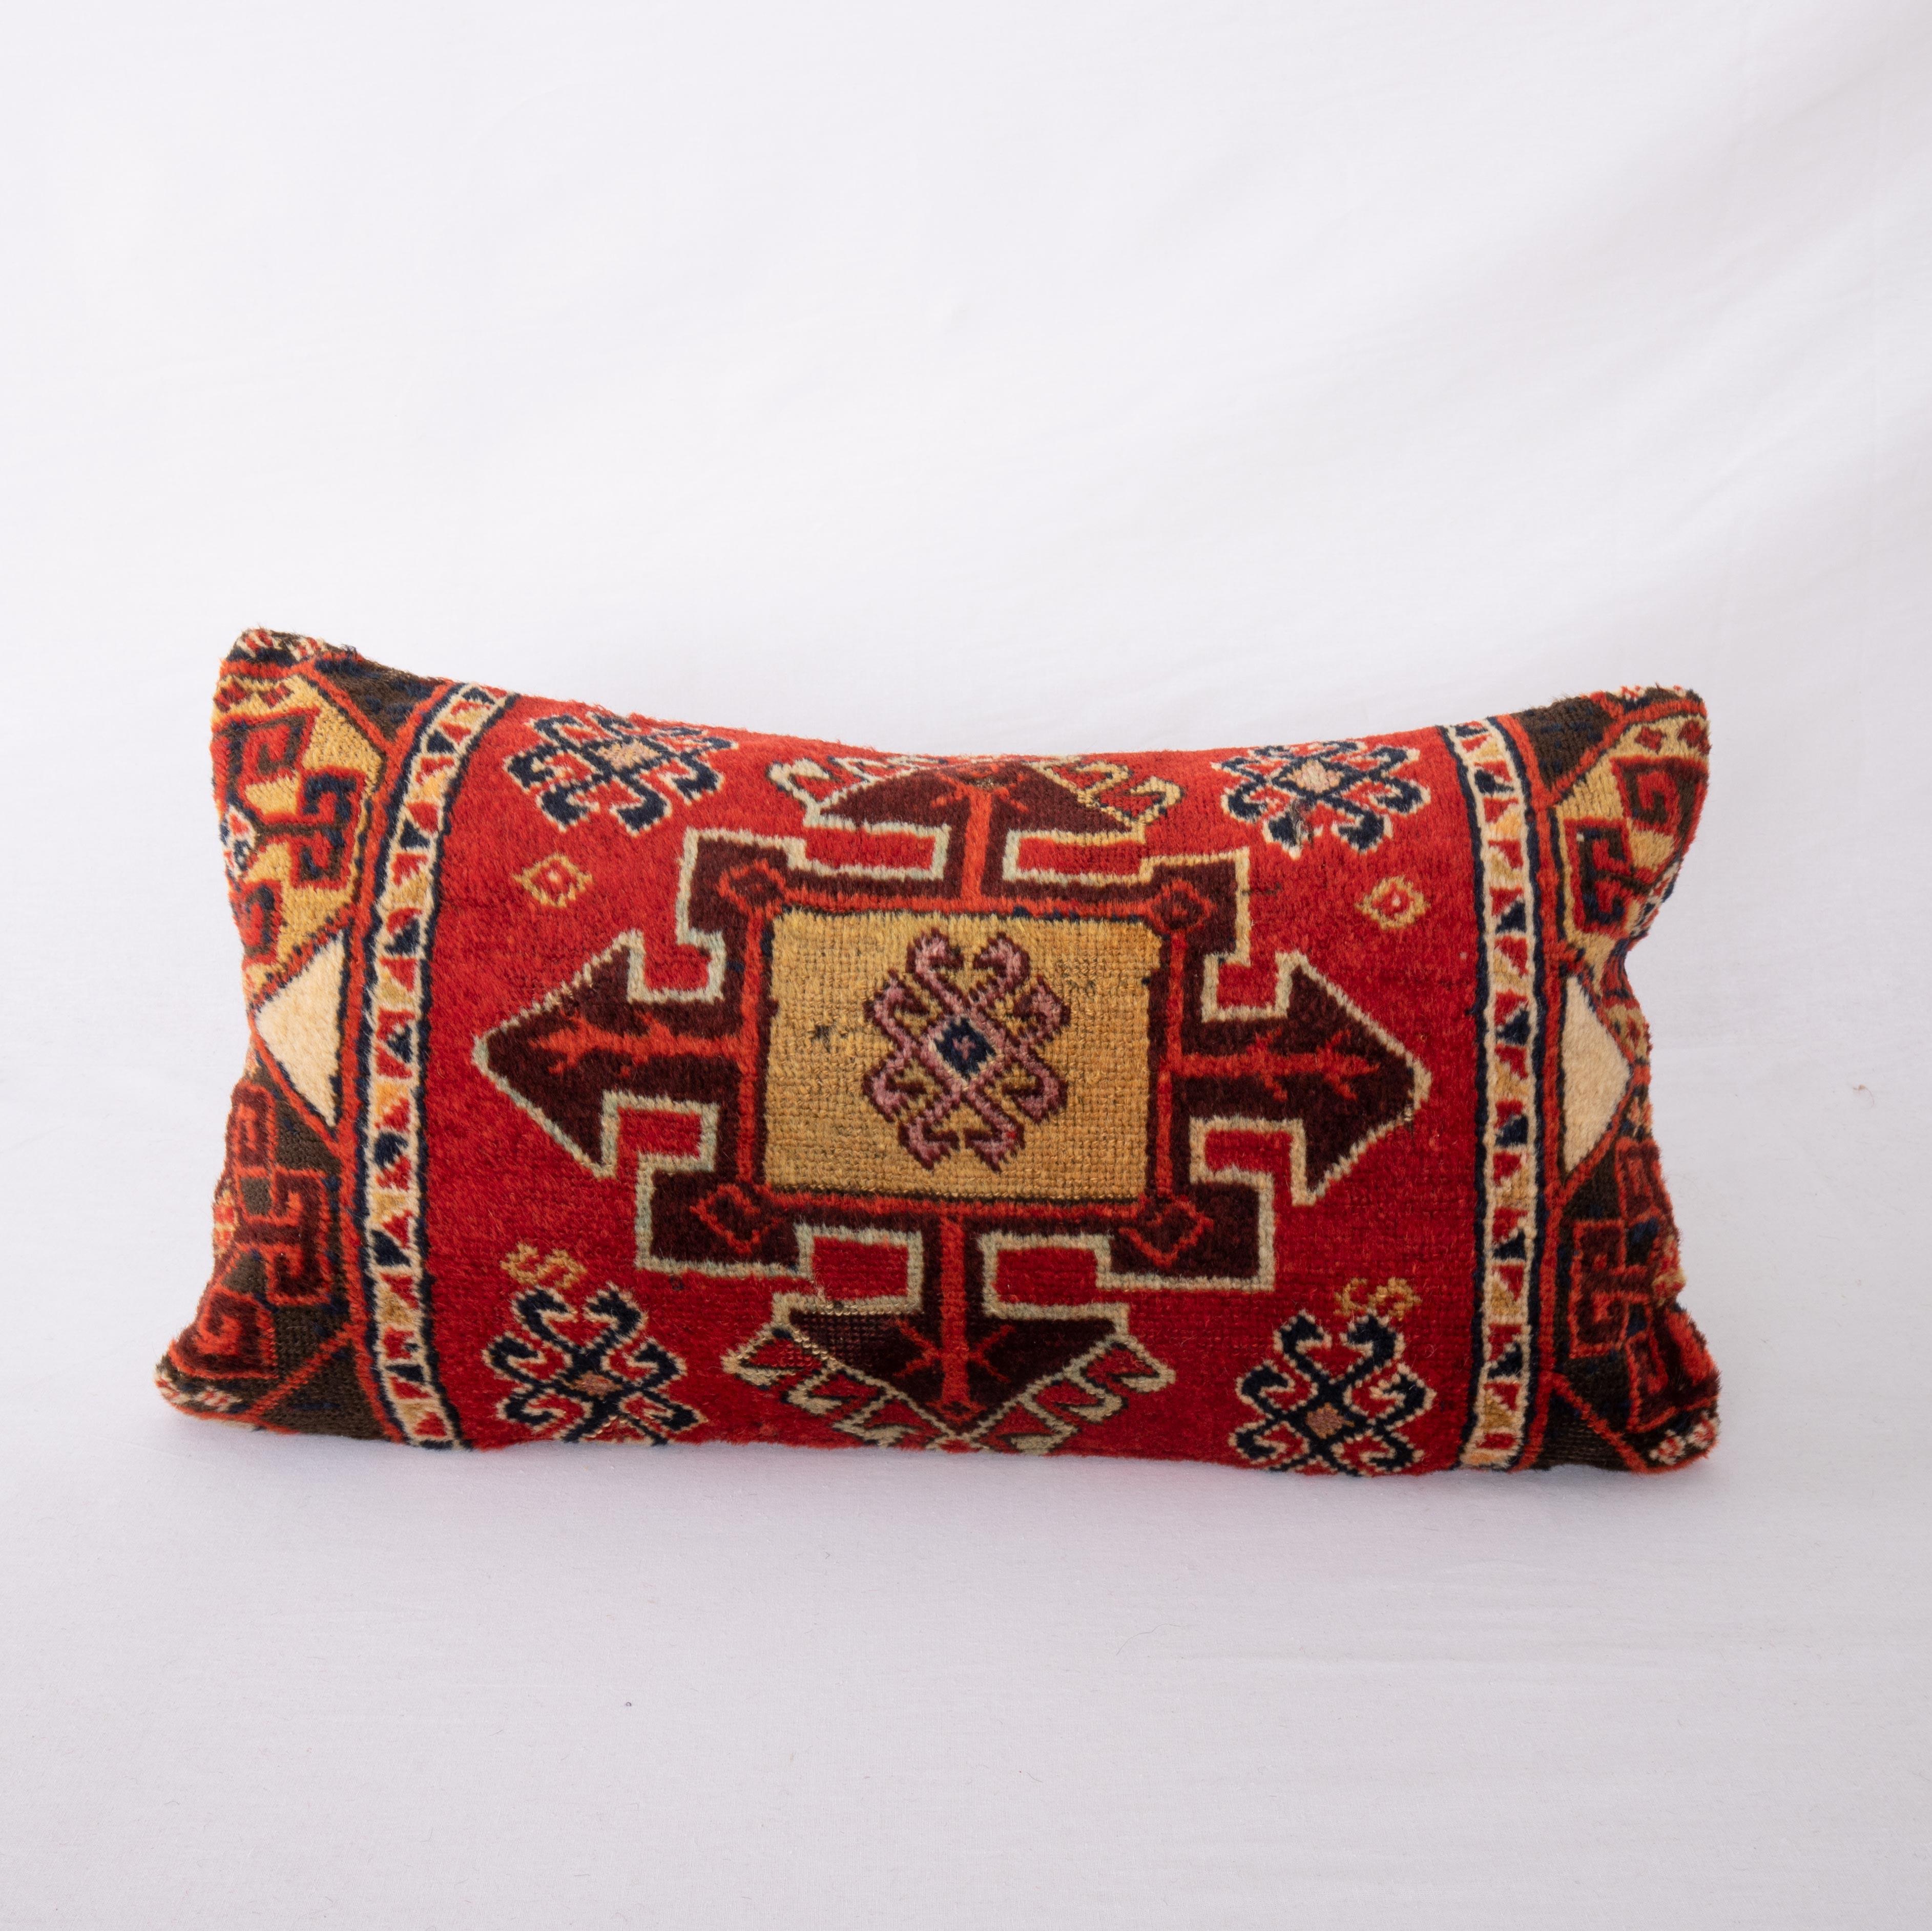 Eastern Anatolian rugs are famous for their wool and color quality. This pillow cover is made from a fragment of a such a great rug.

It does not come with an Insert.
Cotton in the back.
Zipper closure.
Dry clean is recommended.
  